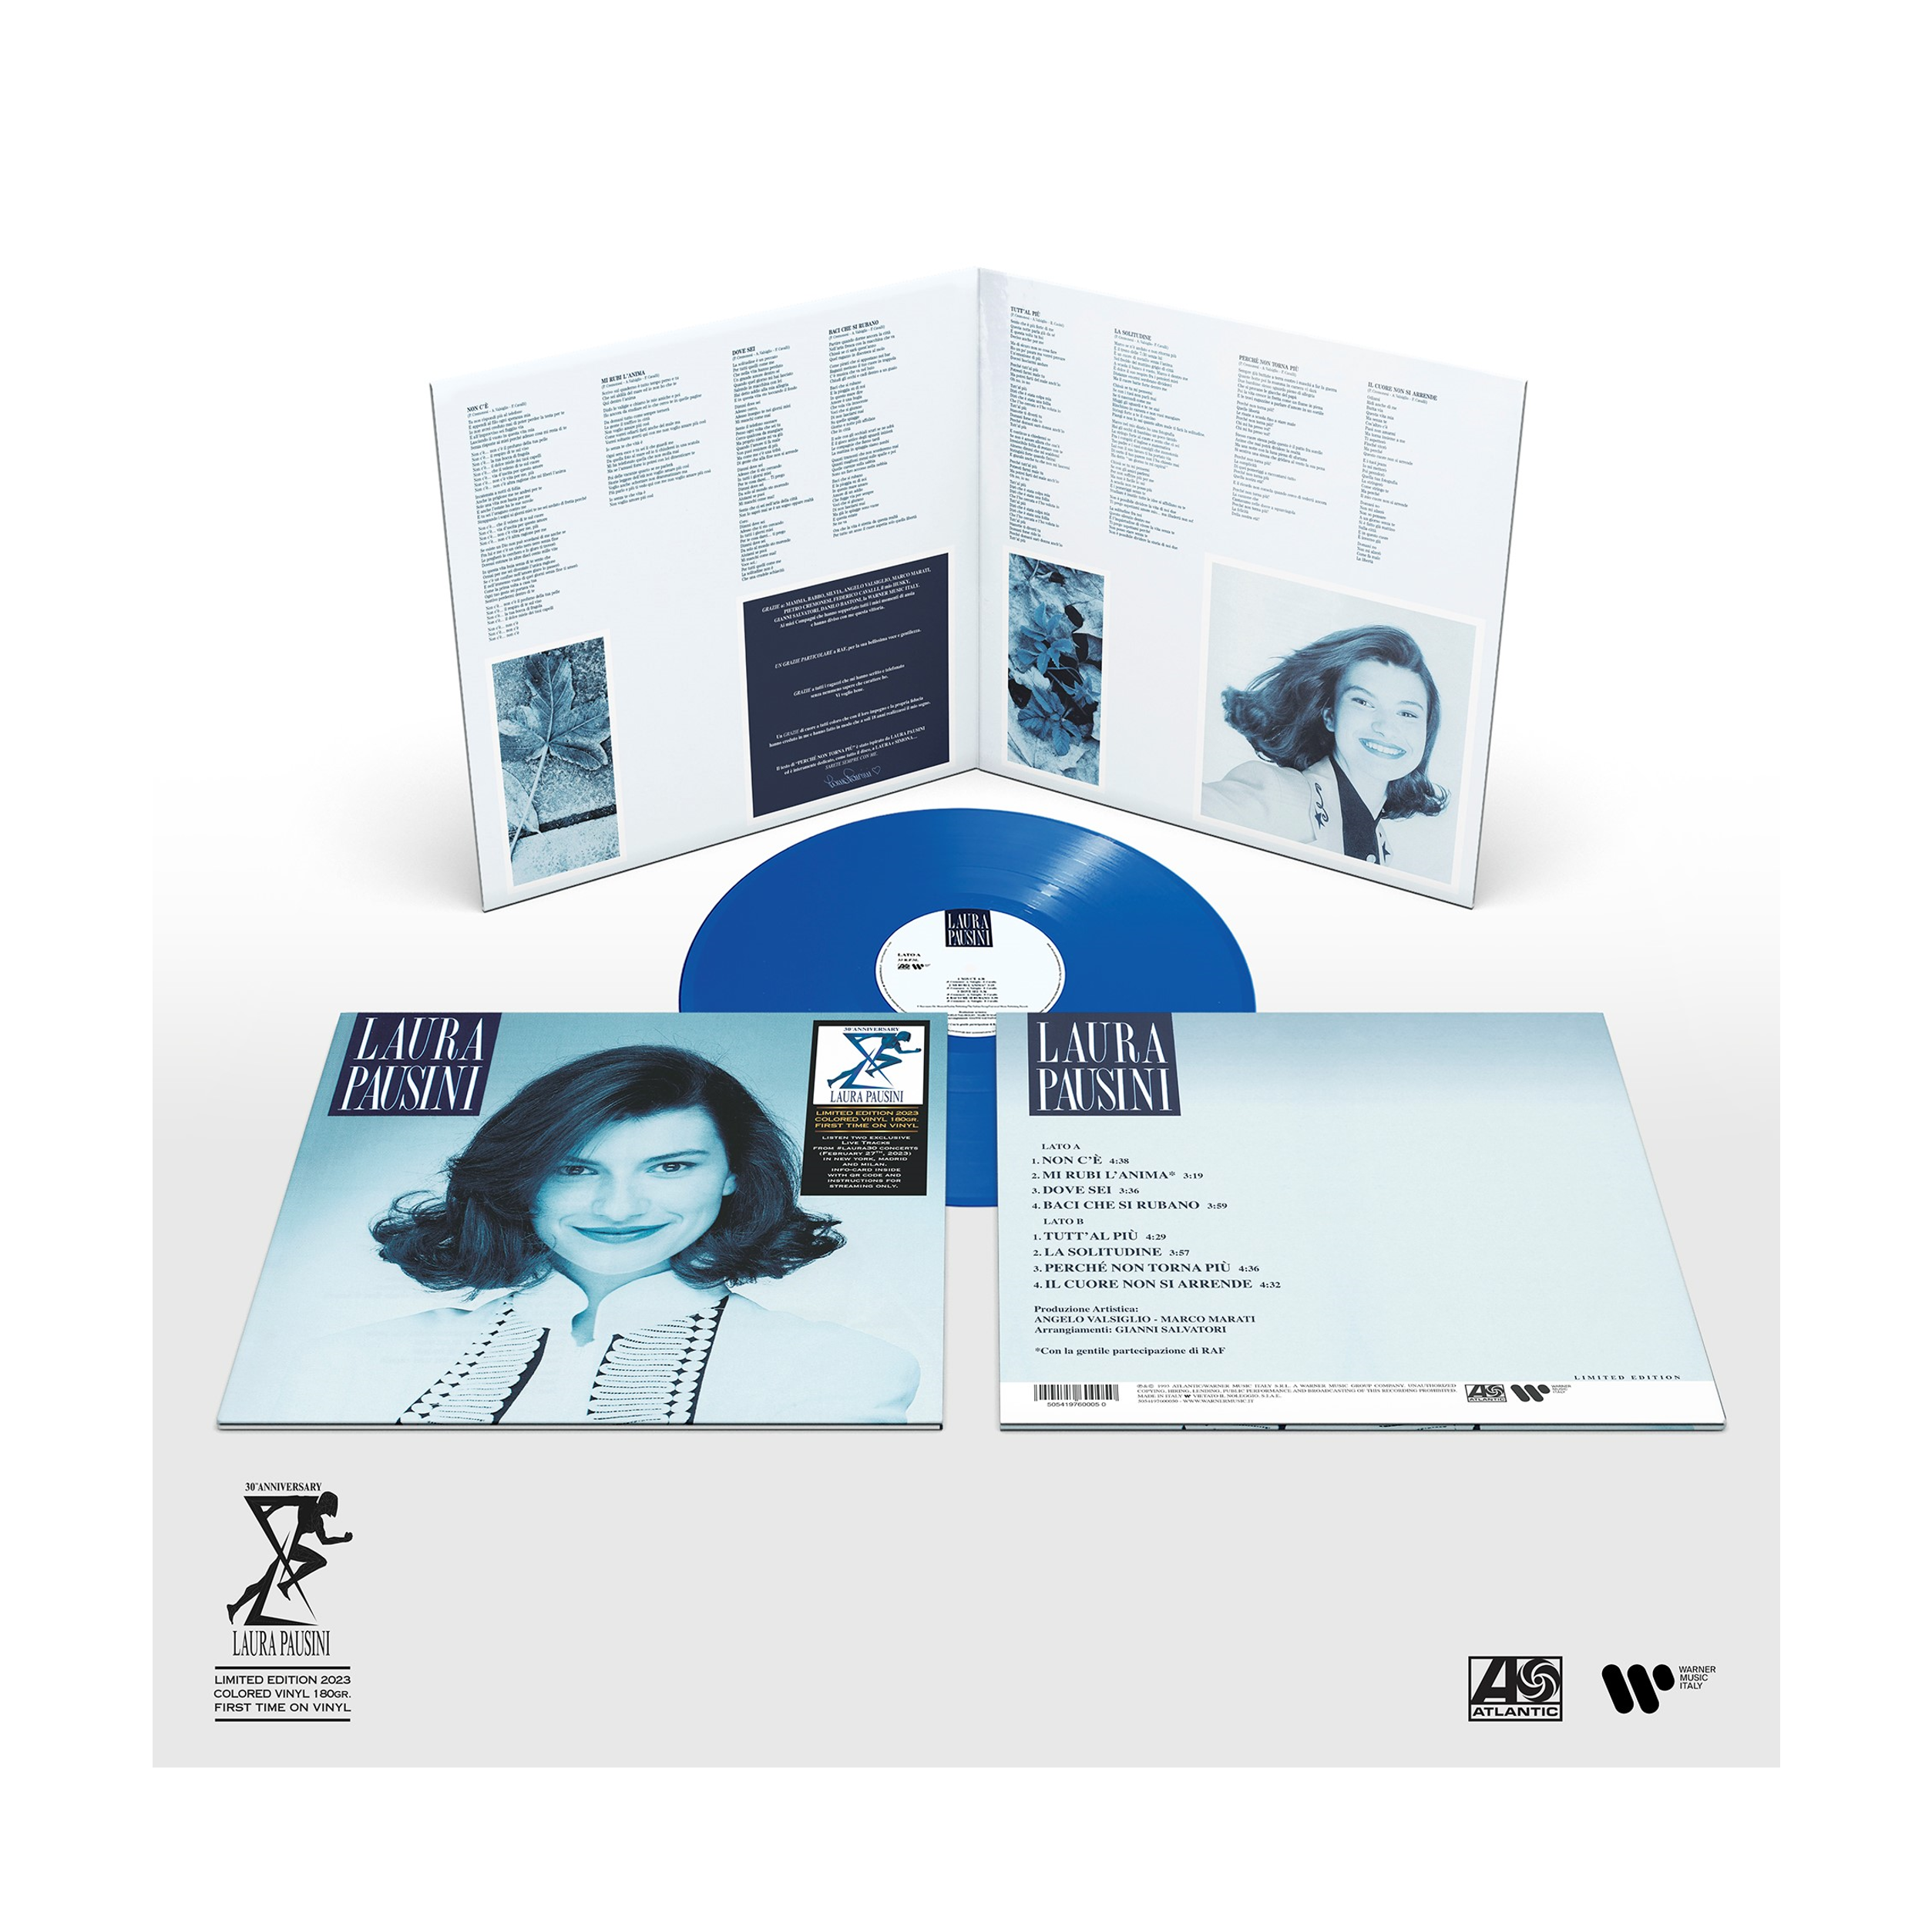 LAURA PAUSINI (1LP 180g Blue Vinyl. Limited & Numbered Edition)